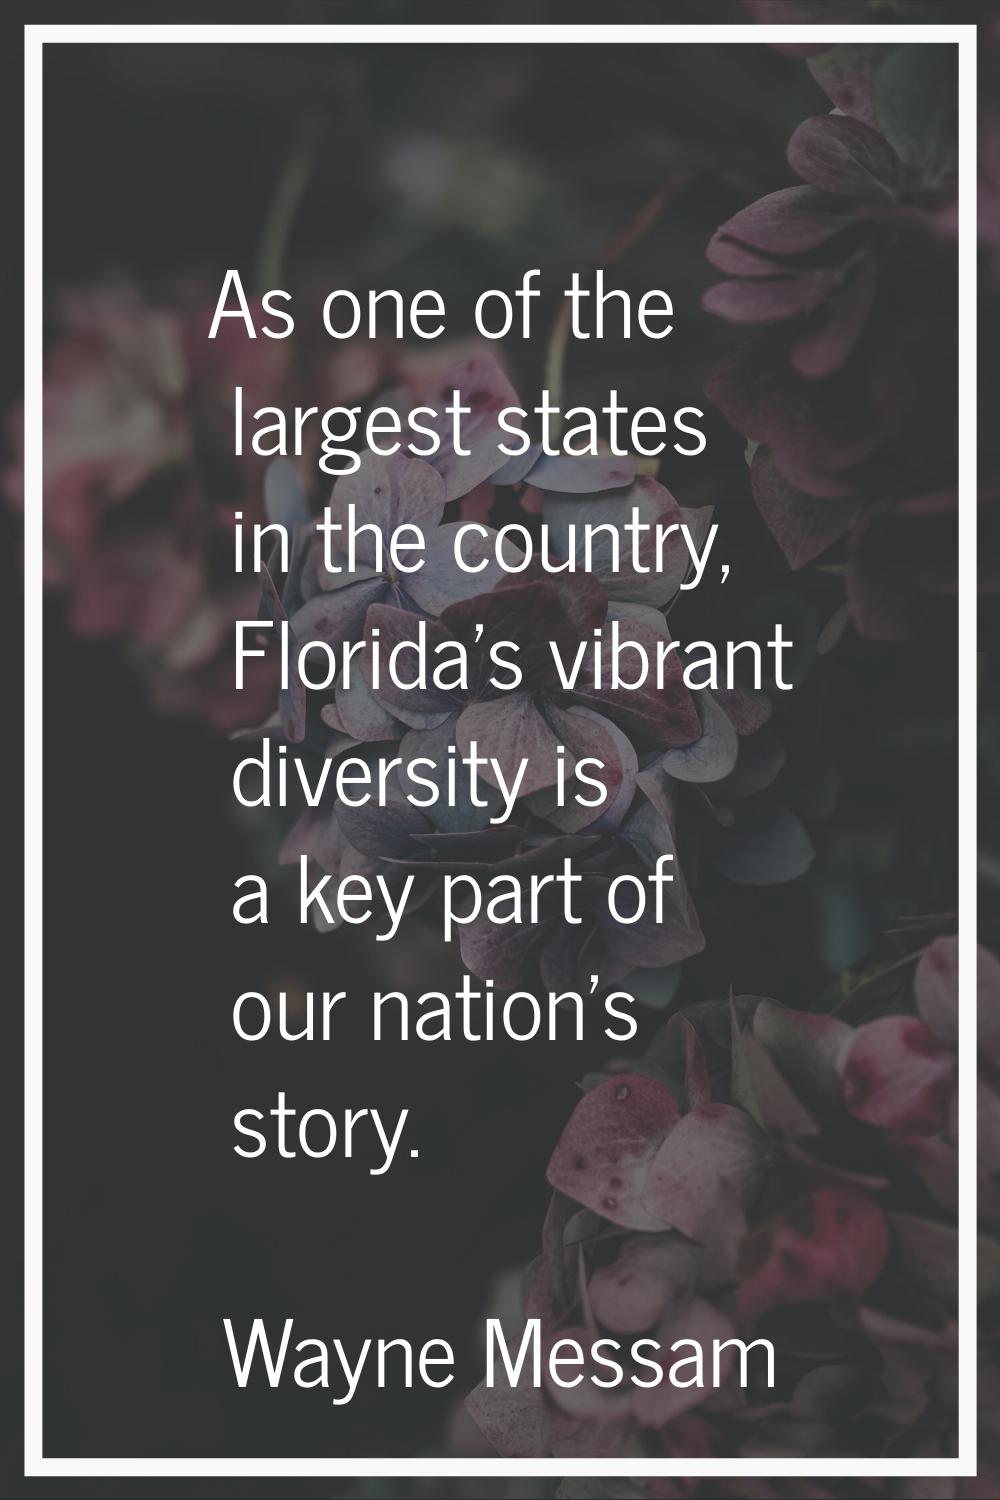 As one of the largest states in the country, Florida's vibrant diversity is a key part of our natio